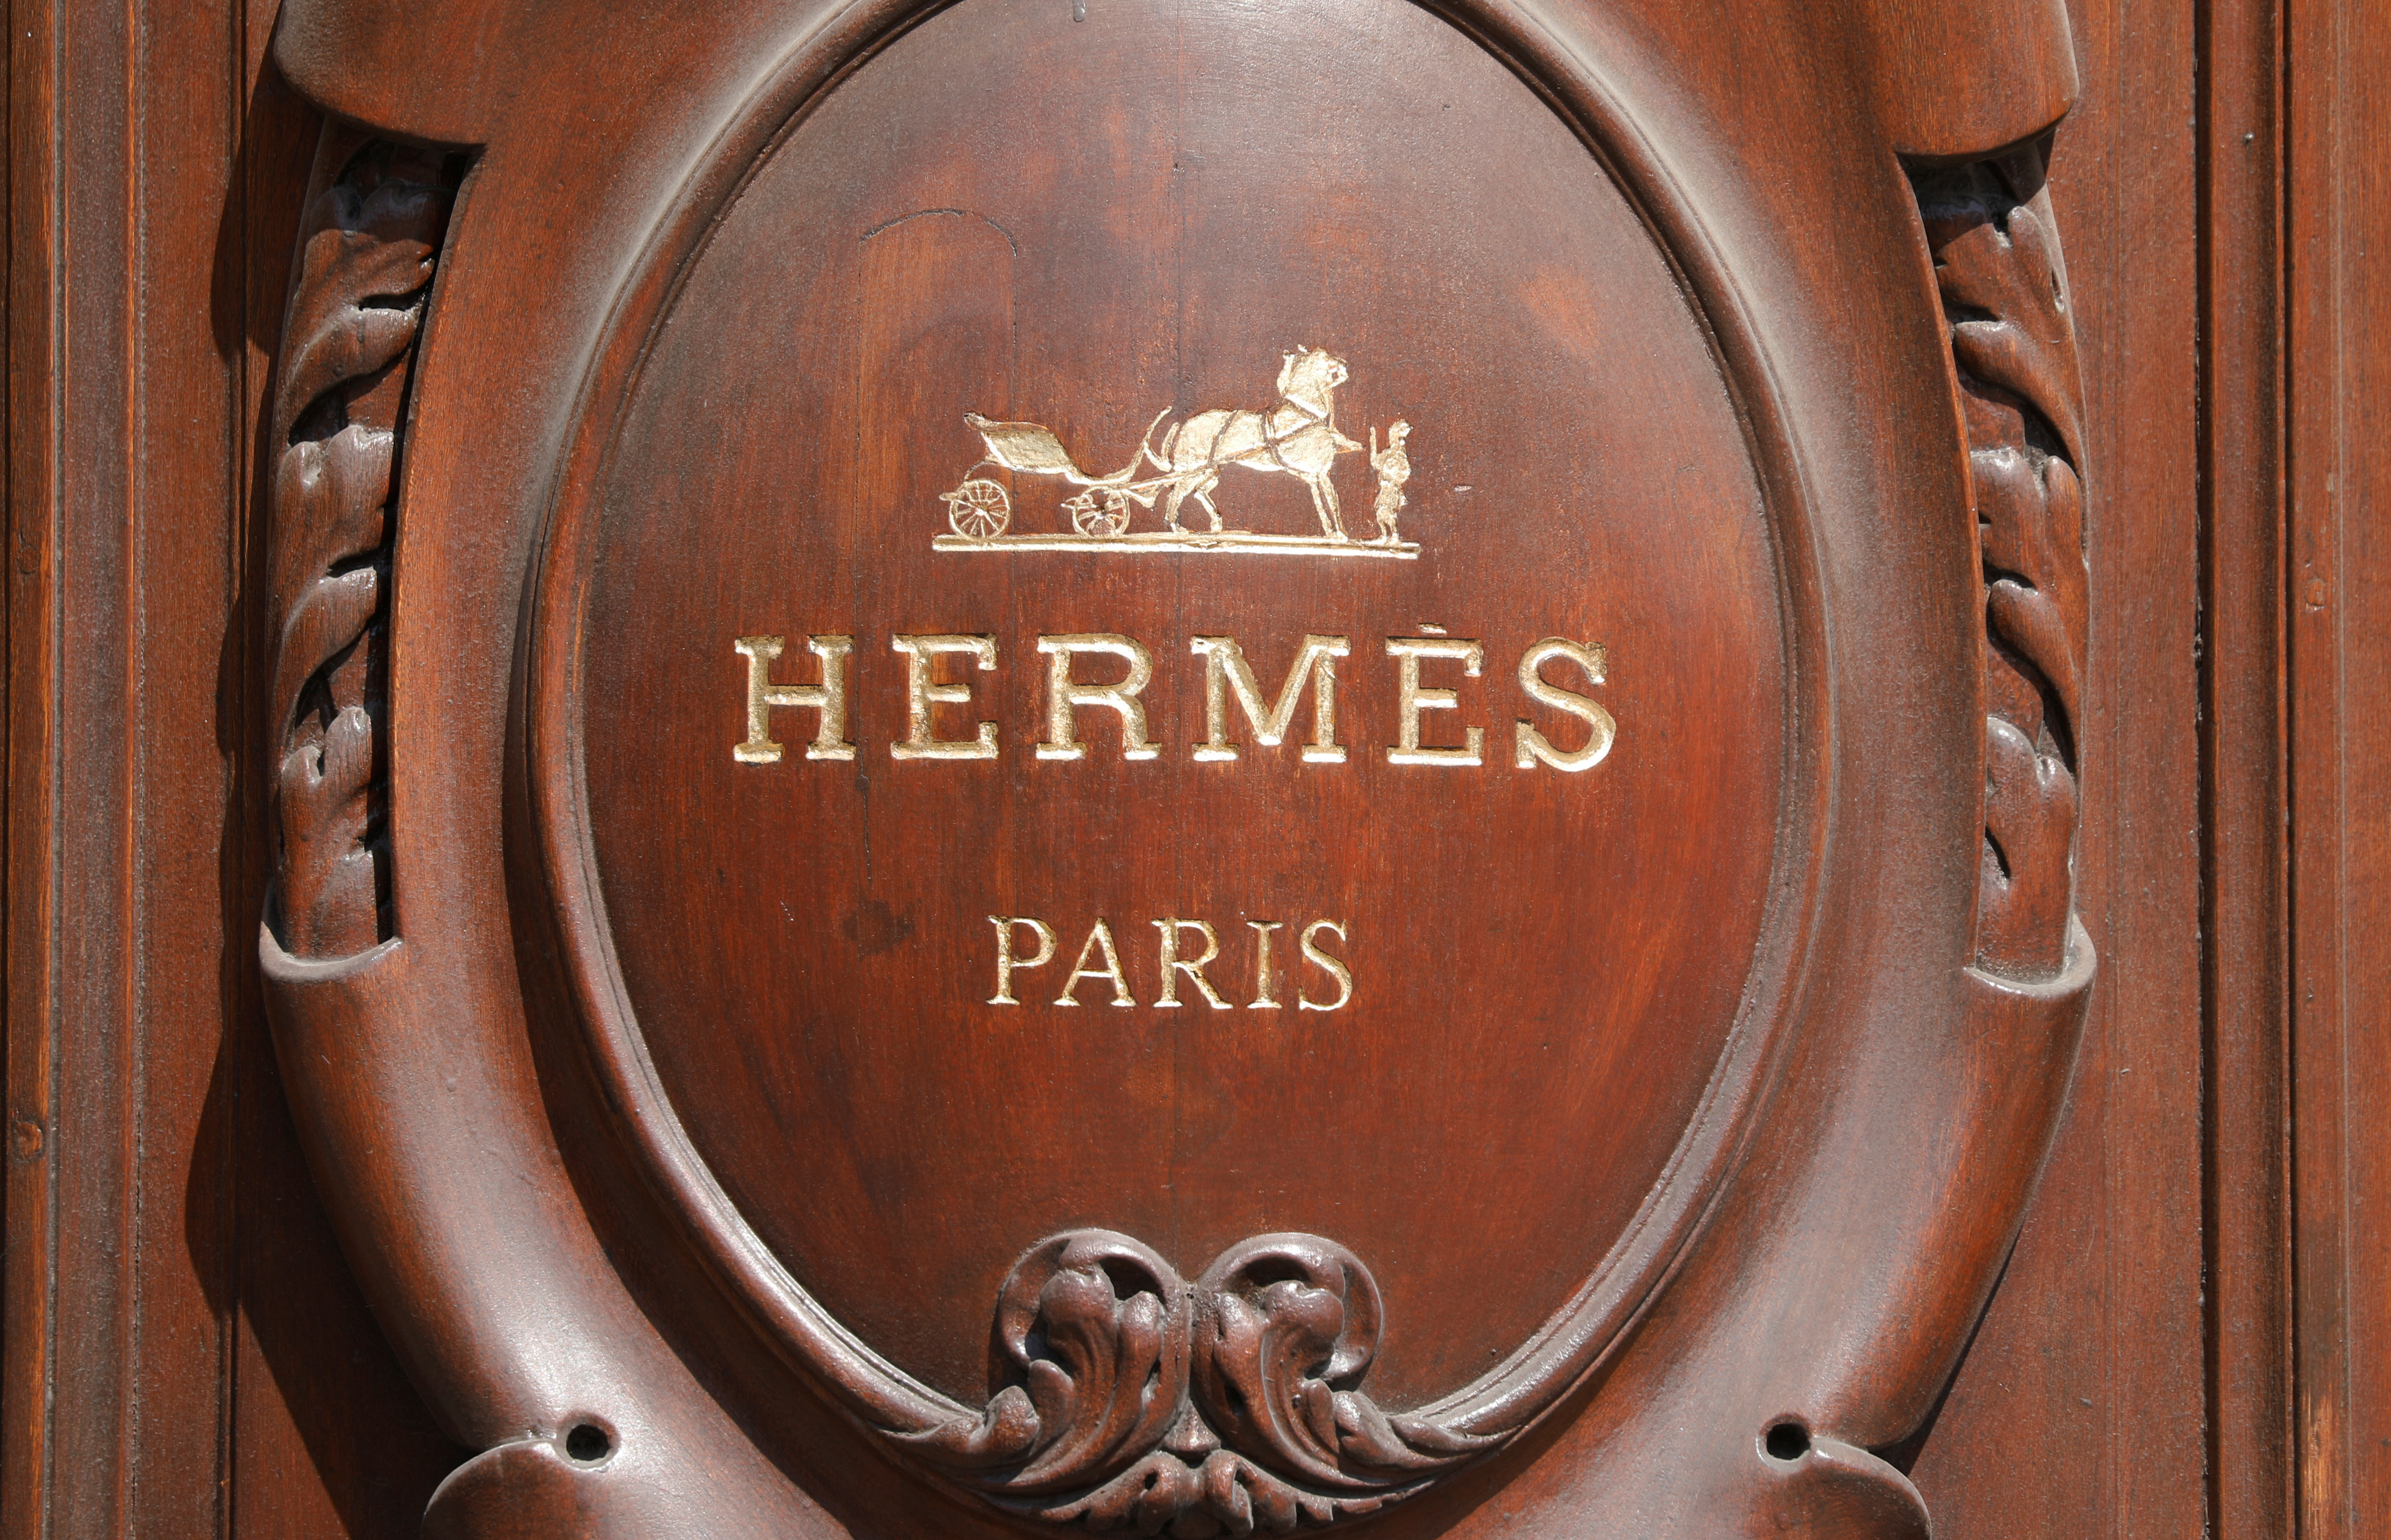 Hermès isn't slowing down: it accelerates and raises its price tags -  LaConceria